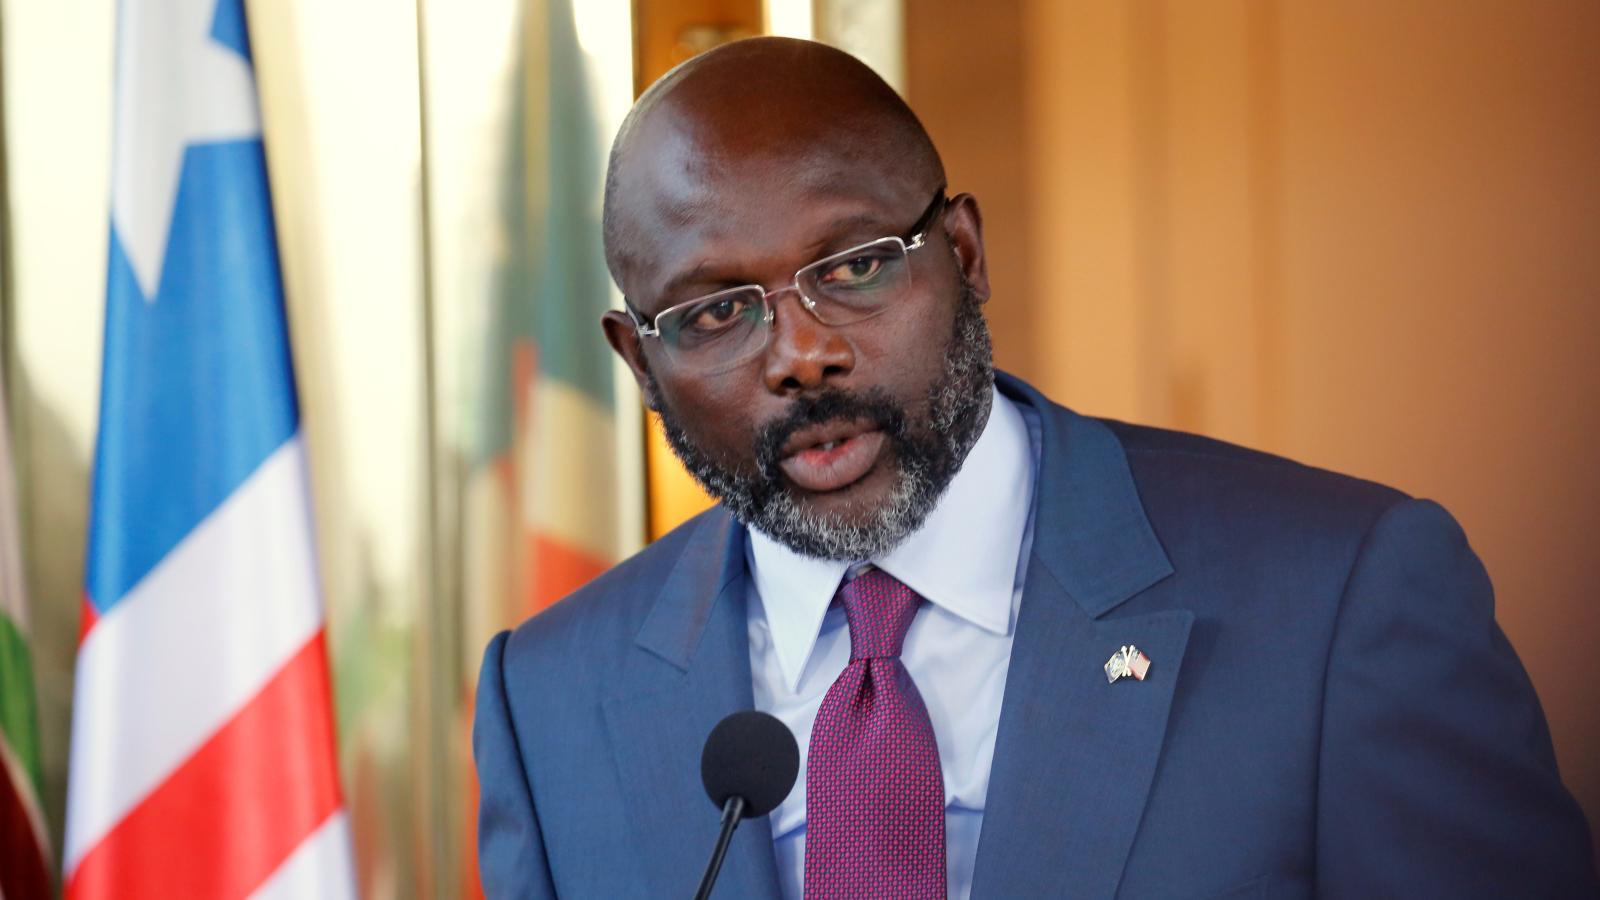 President Weah Challenges Cabinet To Take Liberia To “The Promised Land”